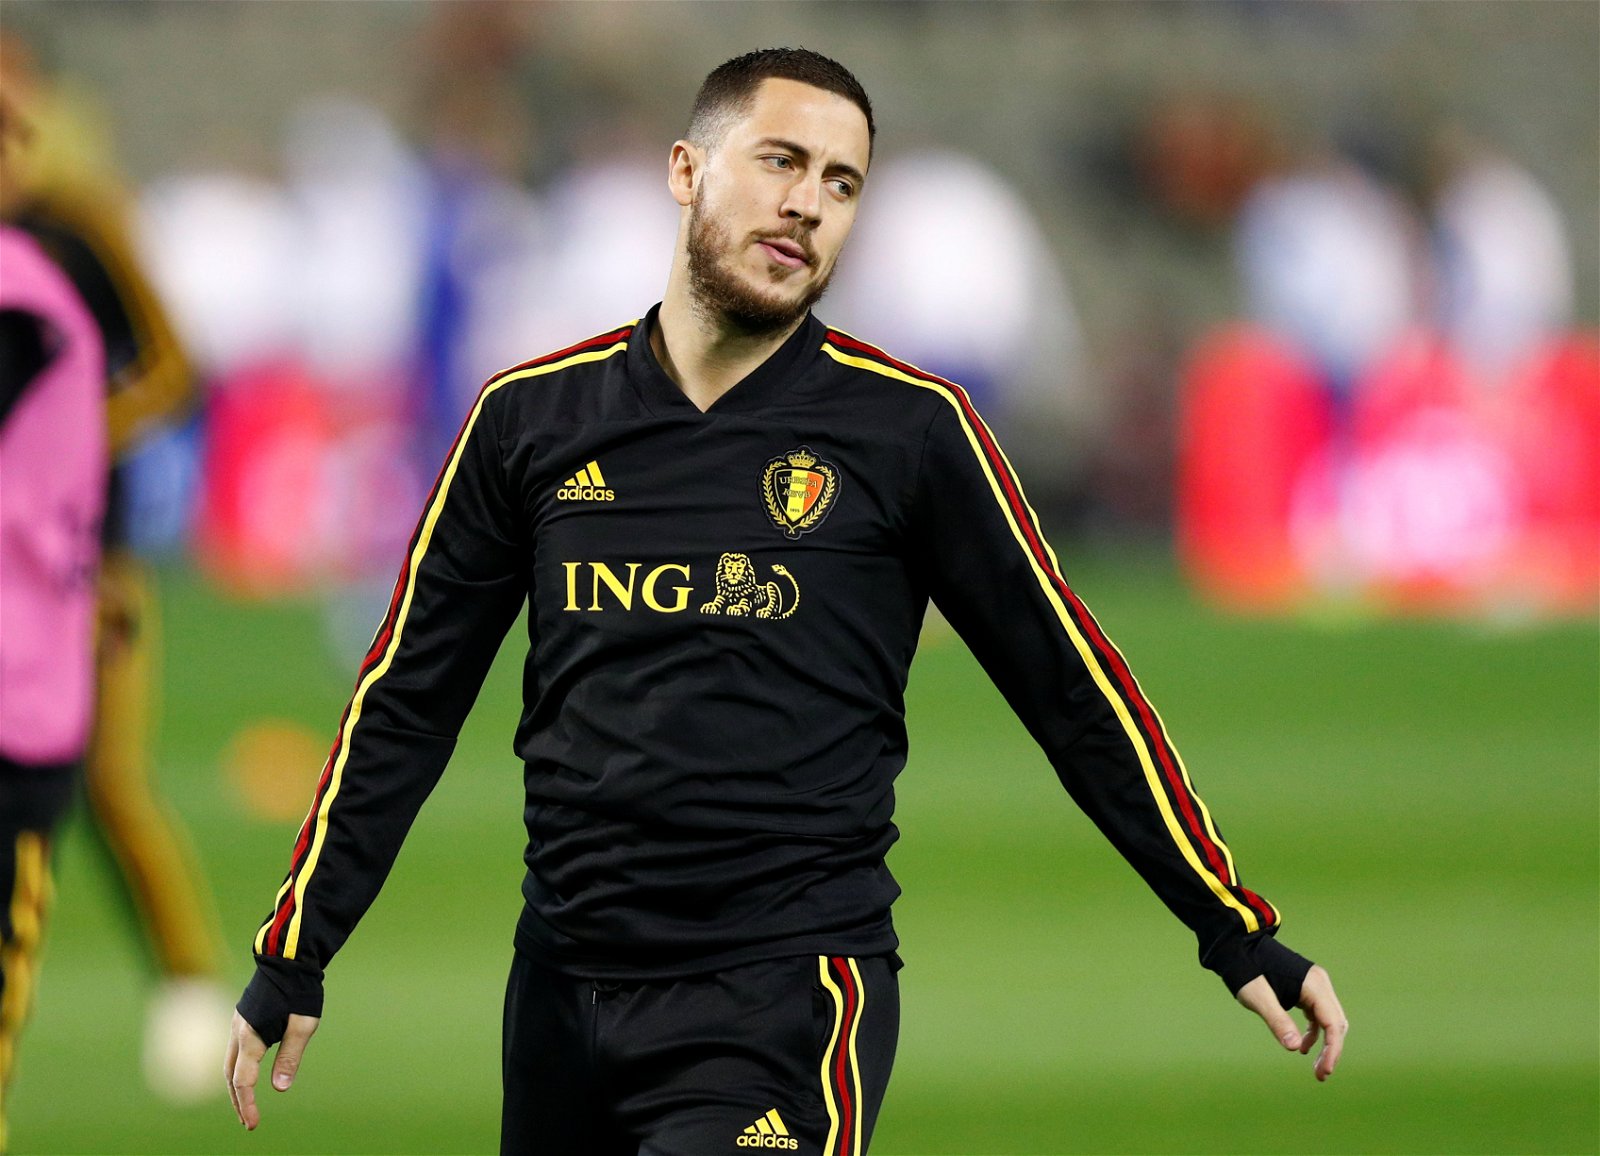 Eden Hazard denies that he has signed a 5-year deal at Real Madrid